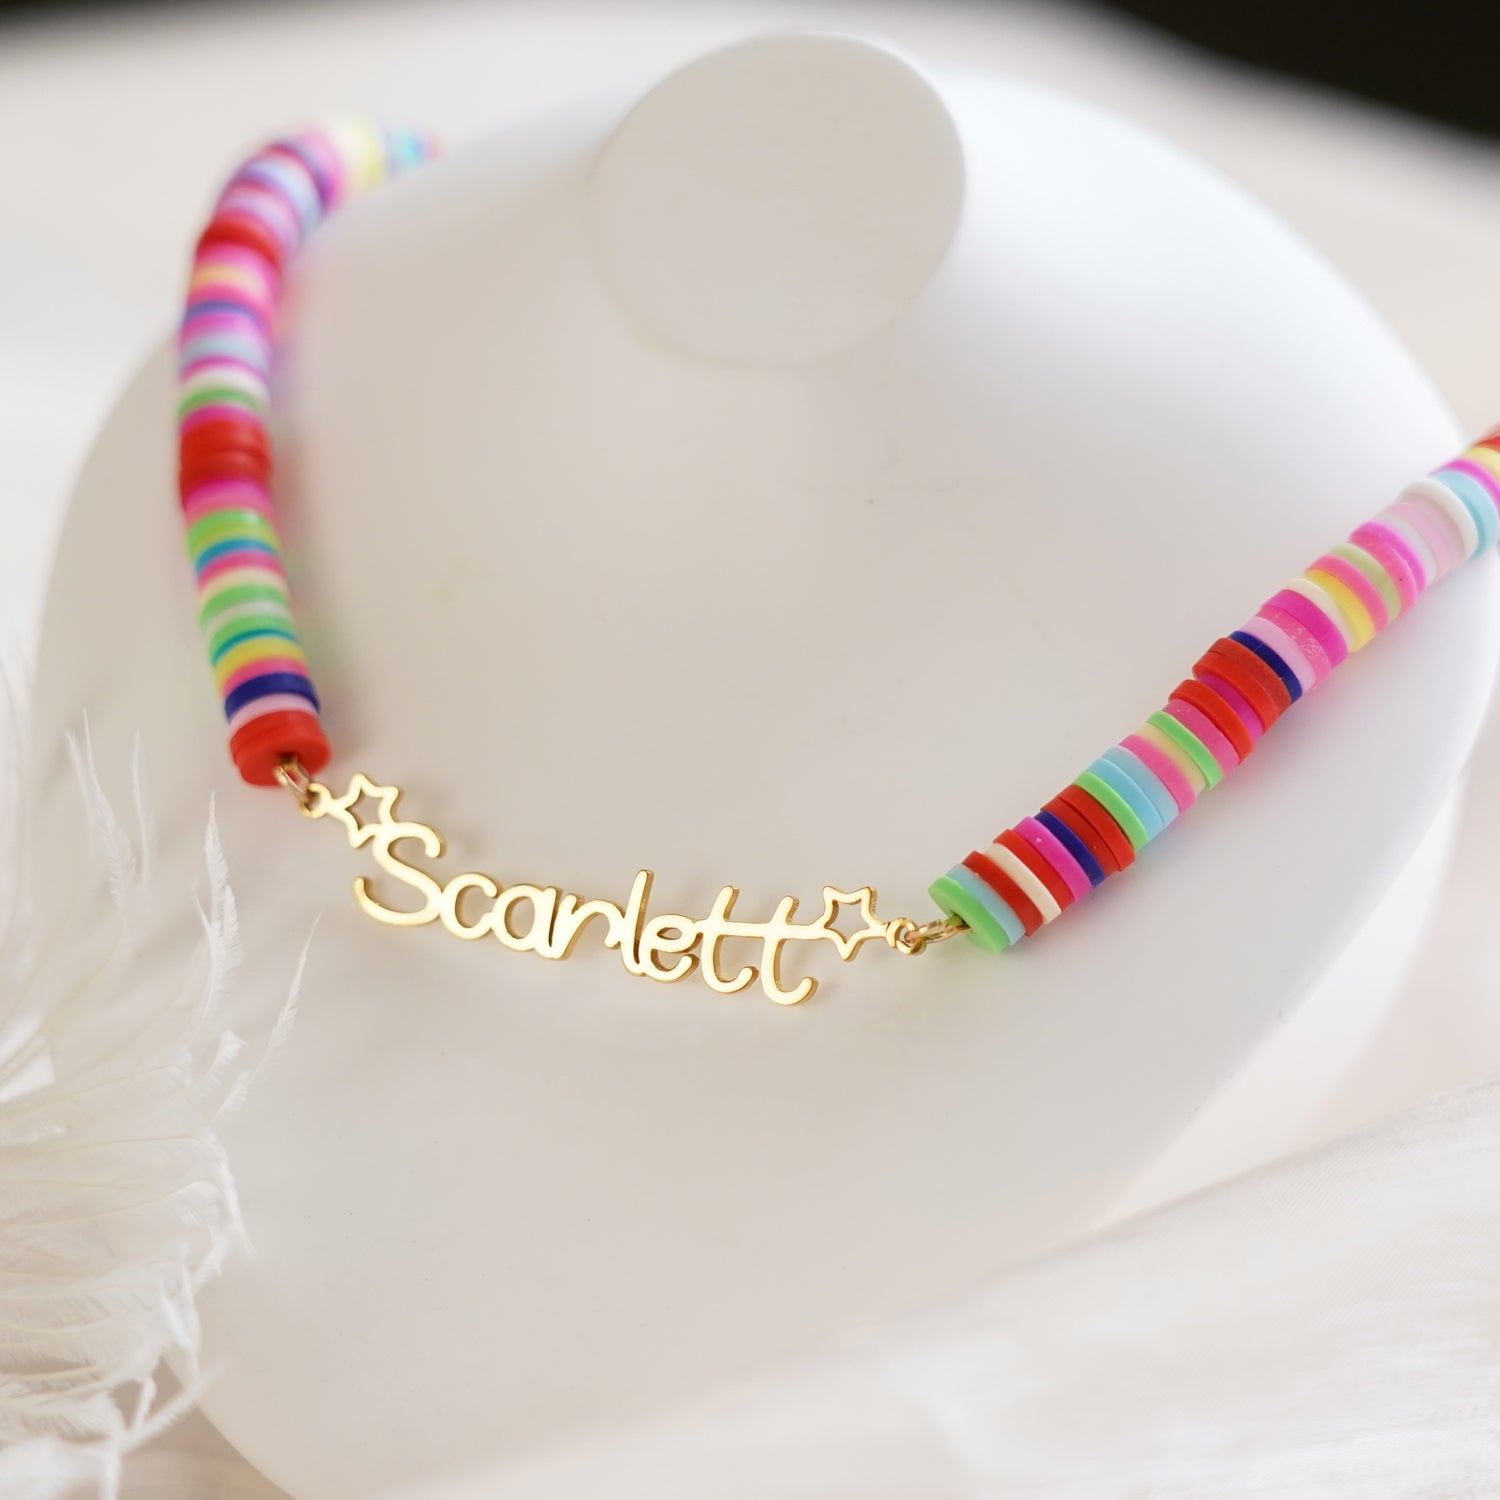 Customized Name Children's Colored Clay Necklace